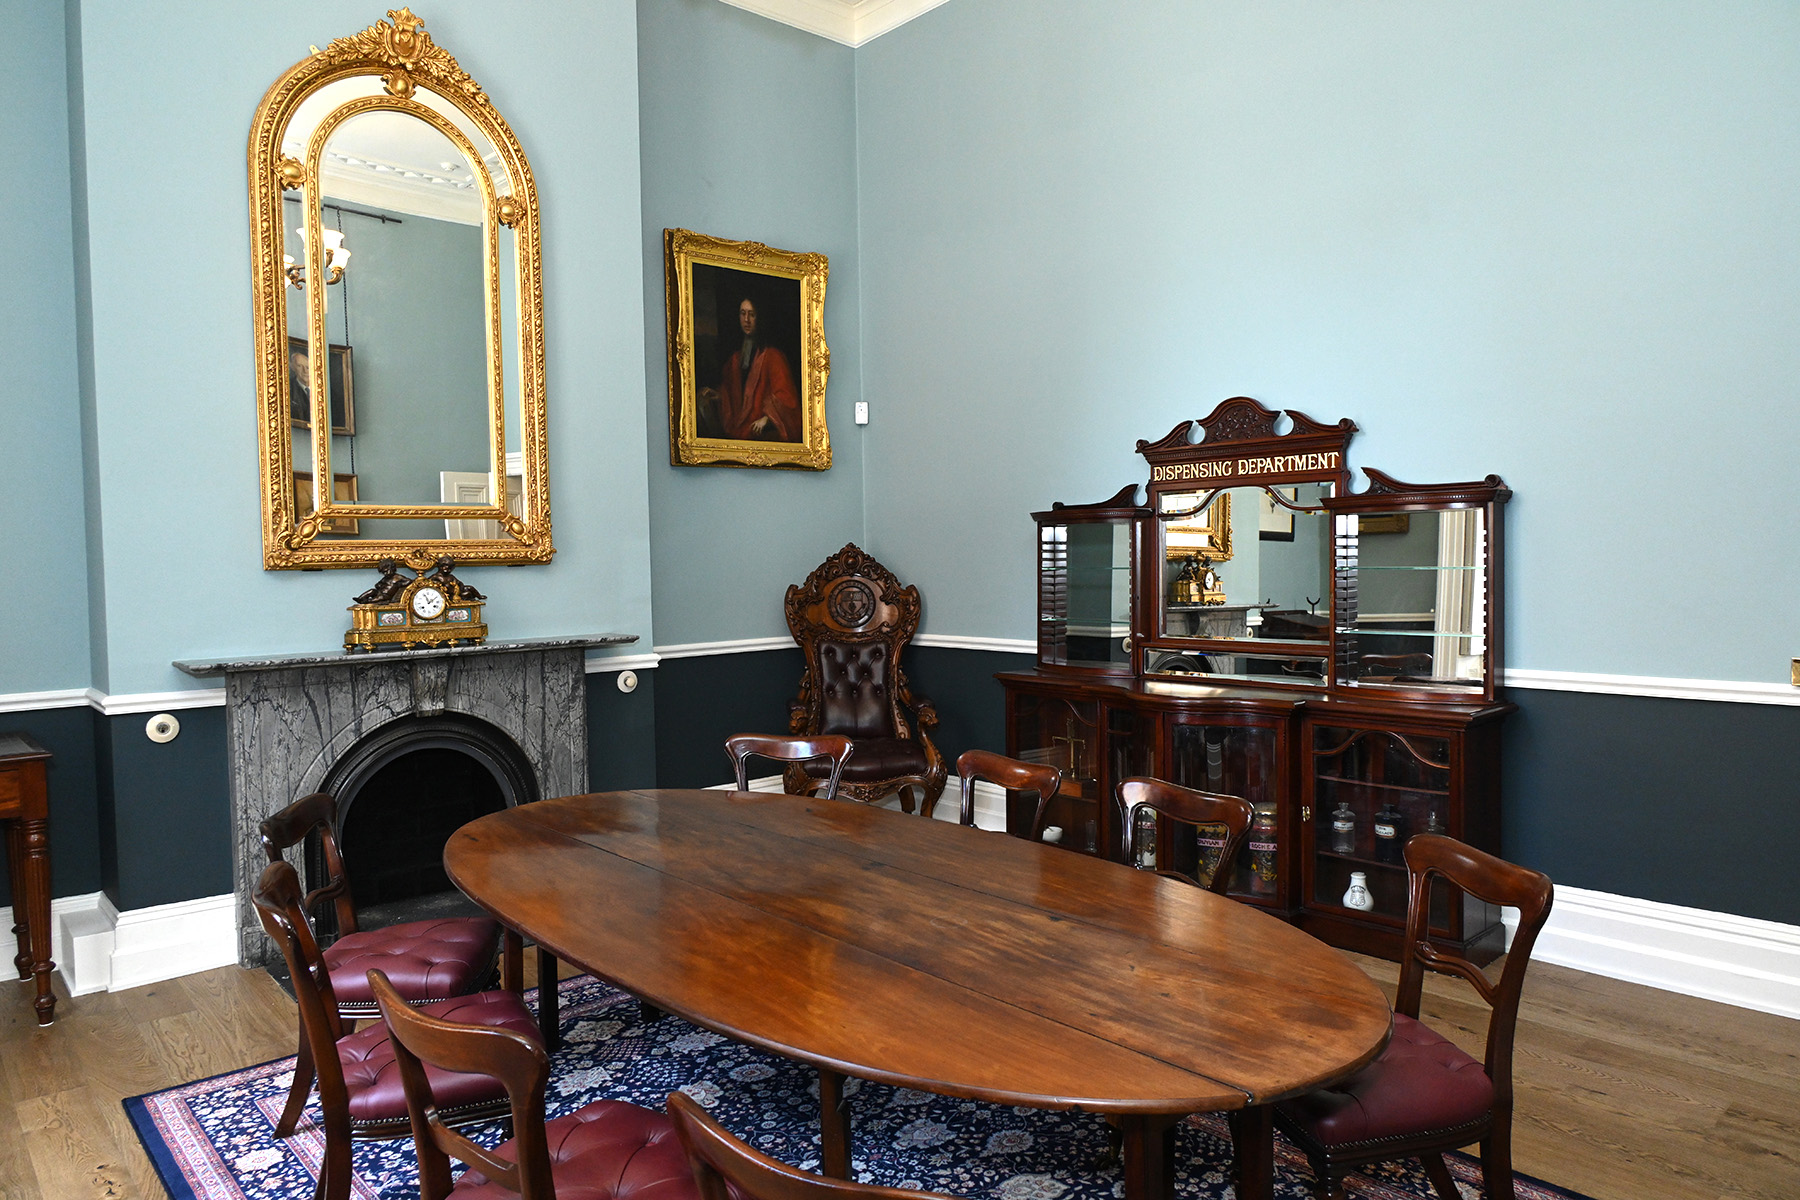 The Stearne Room